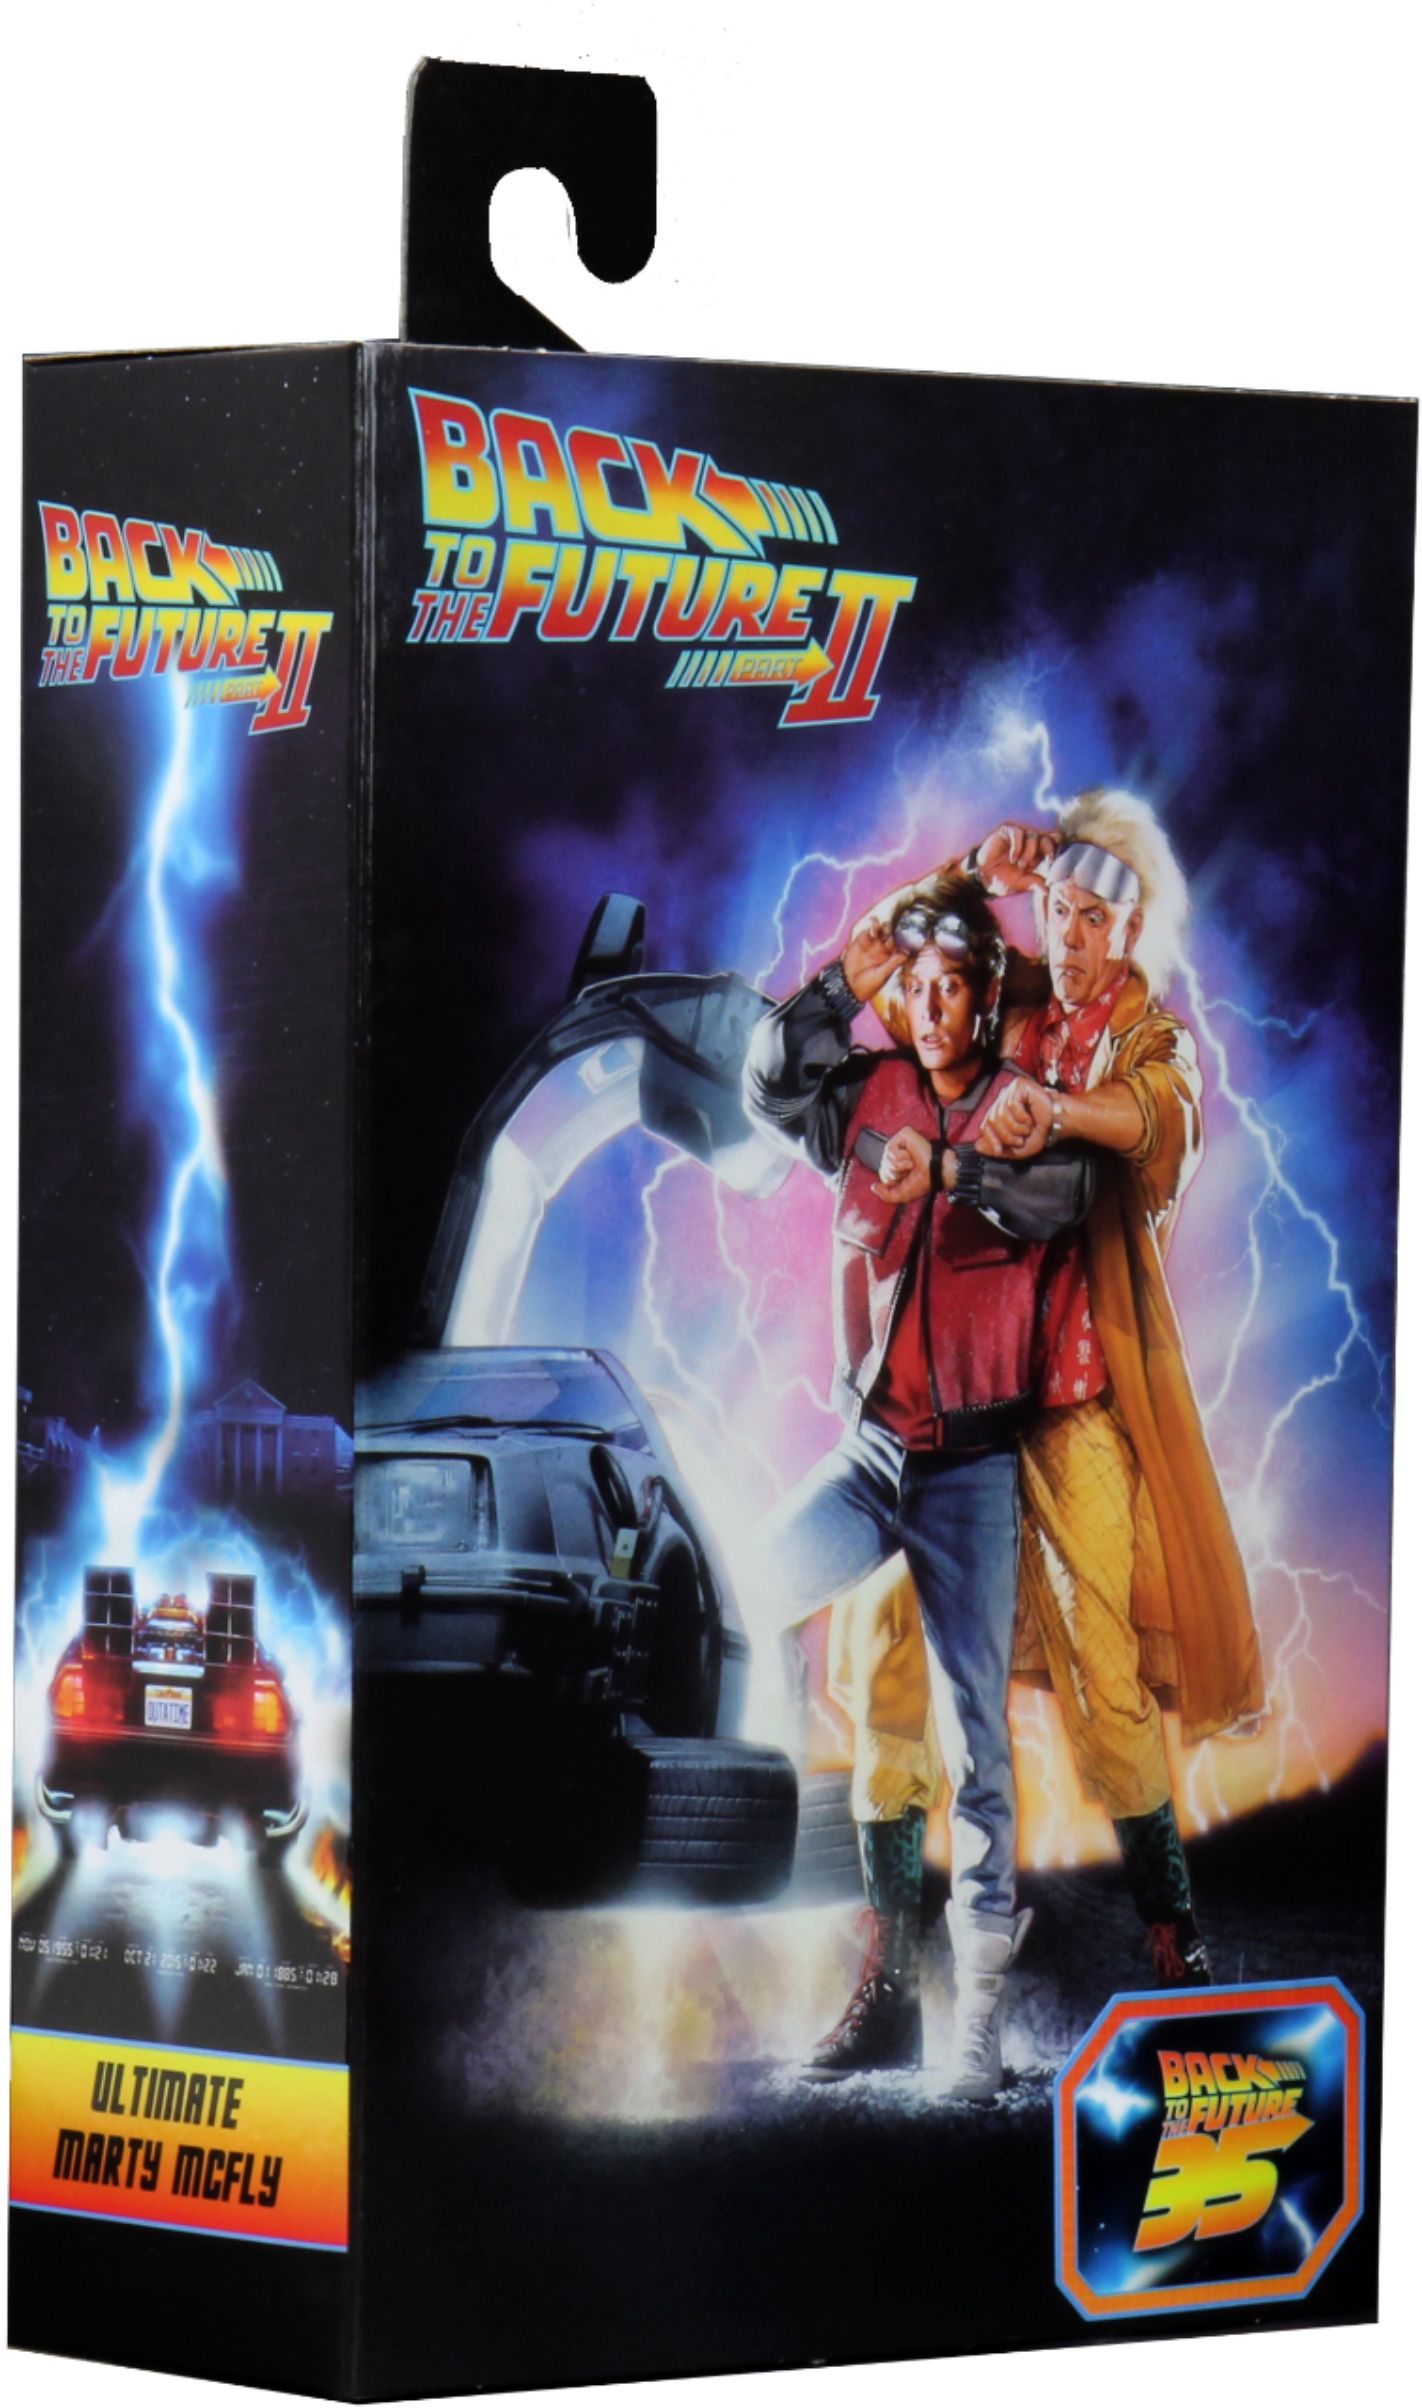 53610 Marty McFly 7in Action Figure Neca Back to the Future: Part 2 for sale online